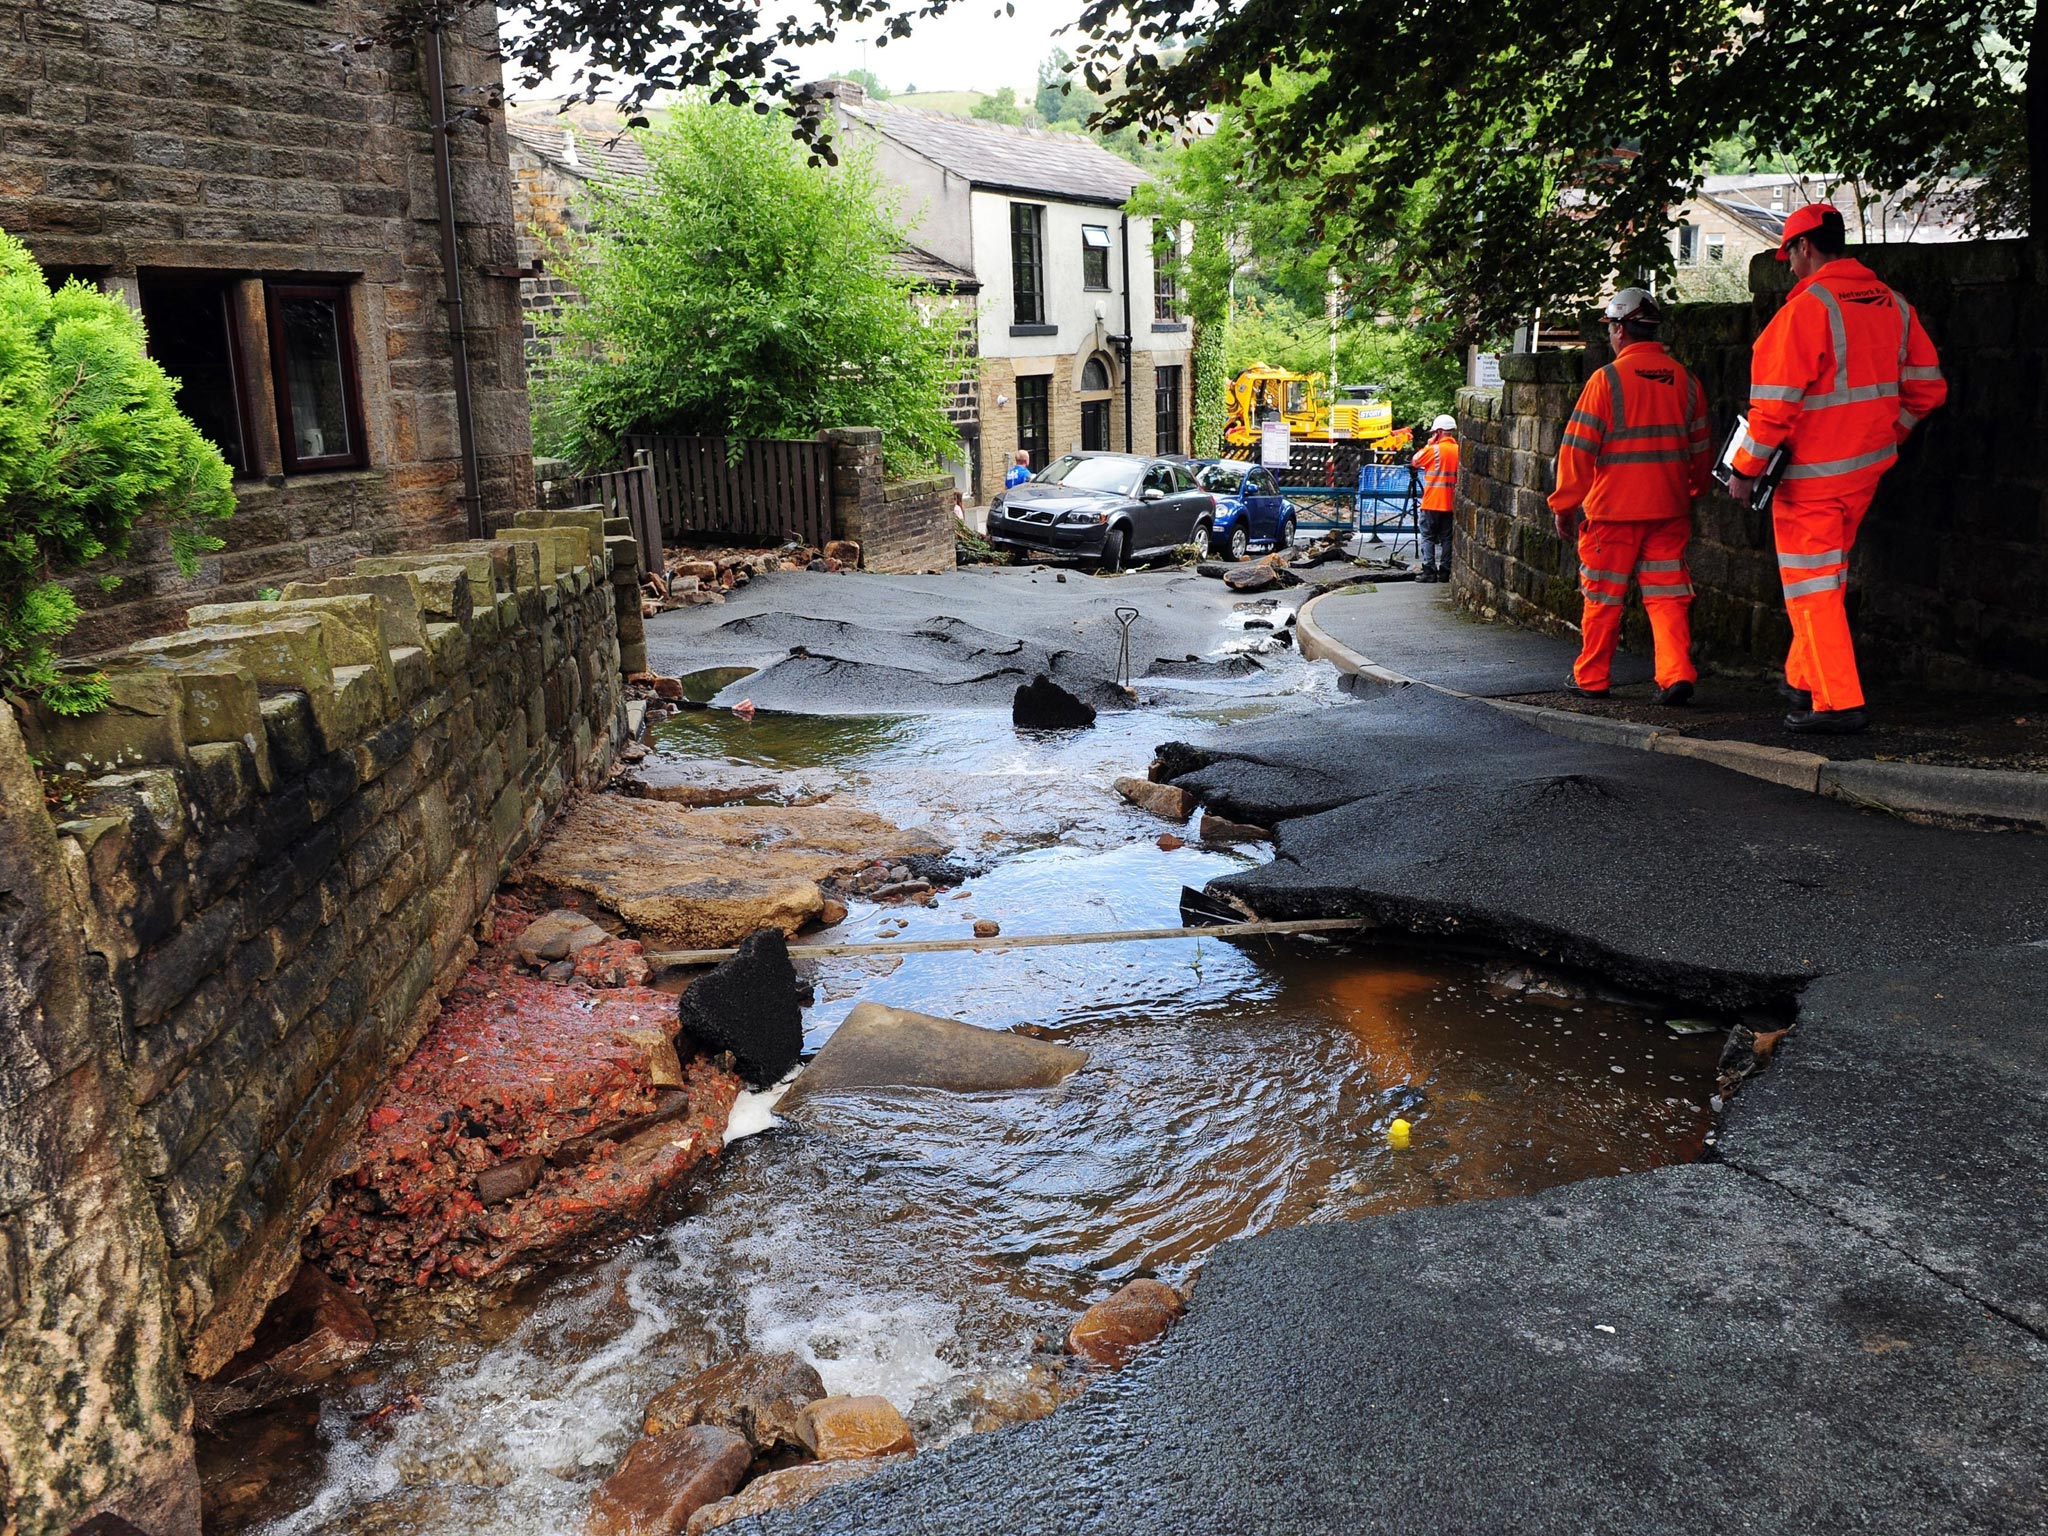 Engineers examine the damage left by flash floods in Walsden, near Todmorden, West Yorkshire